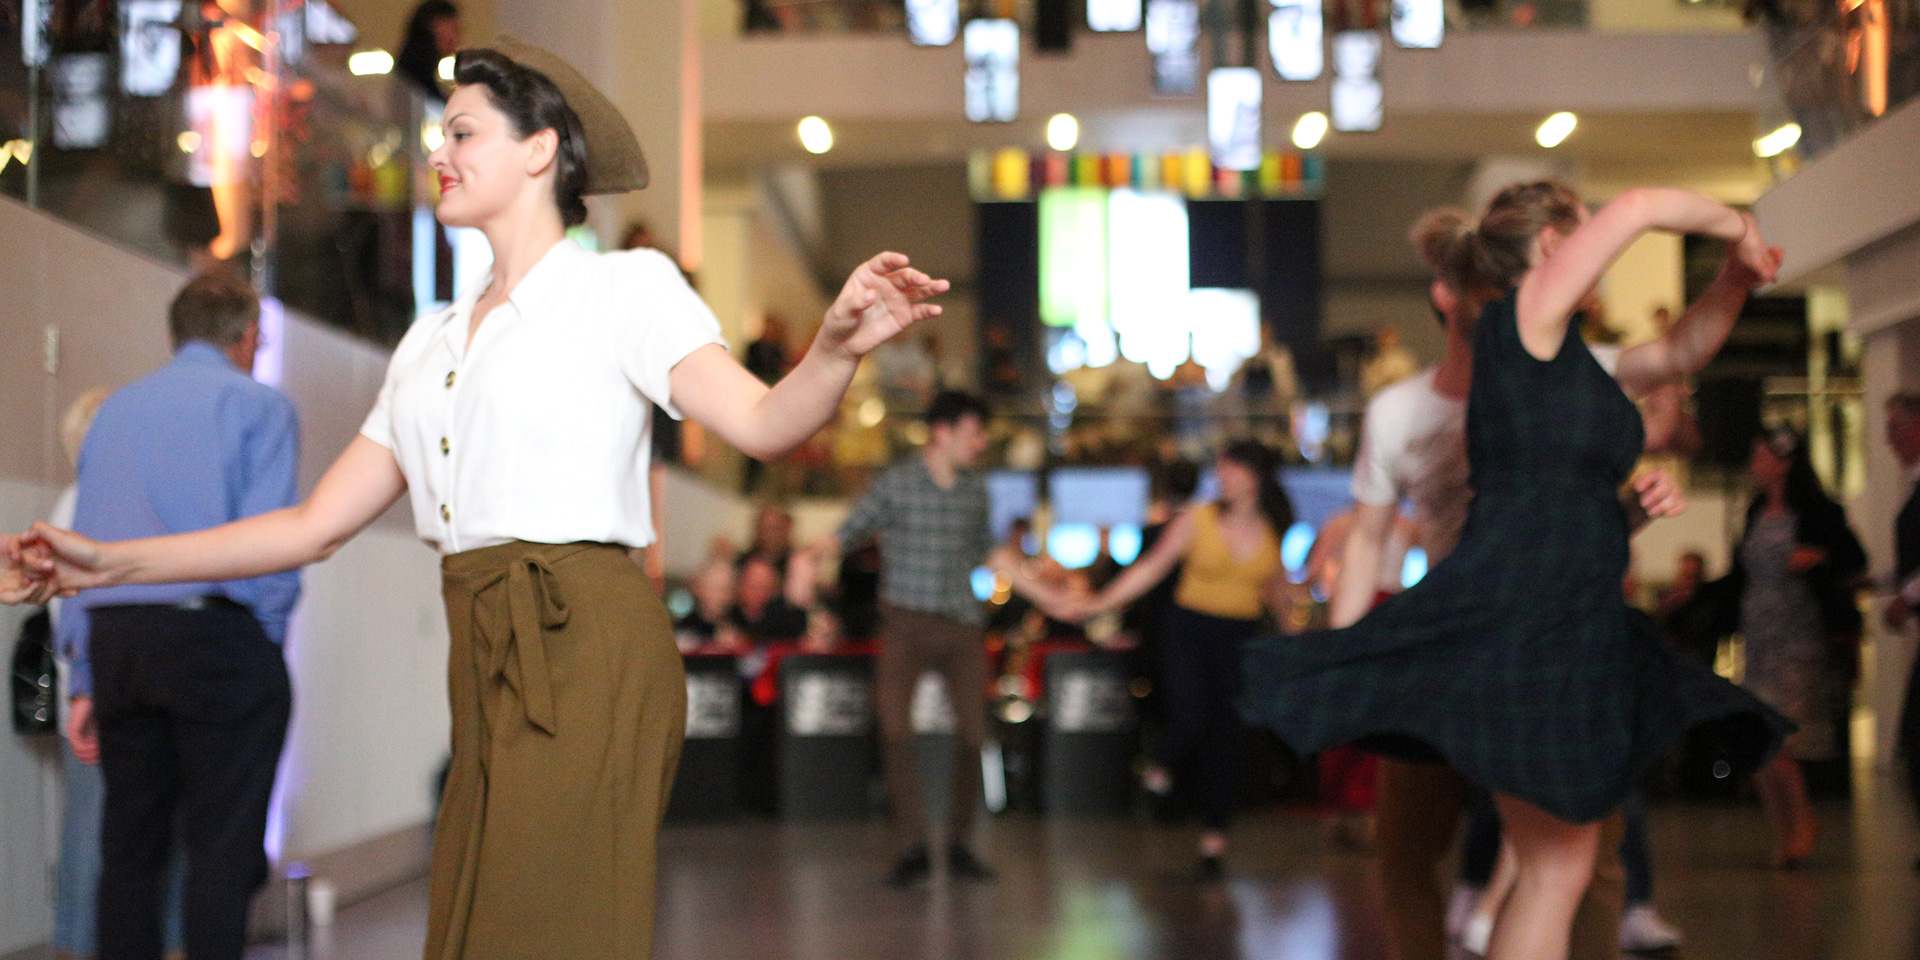 1940s-themed dance night at the National Army Museum